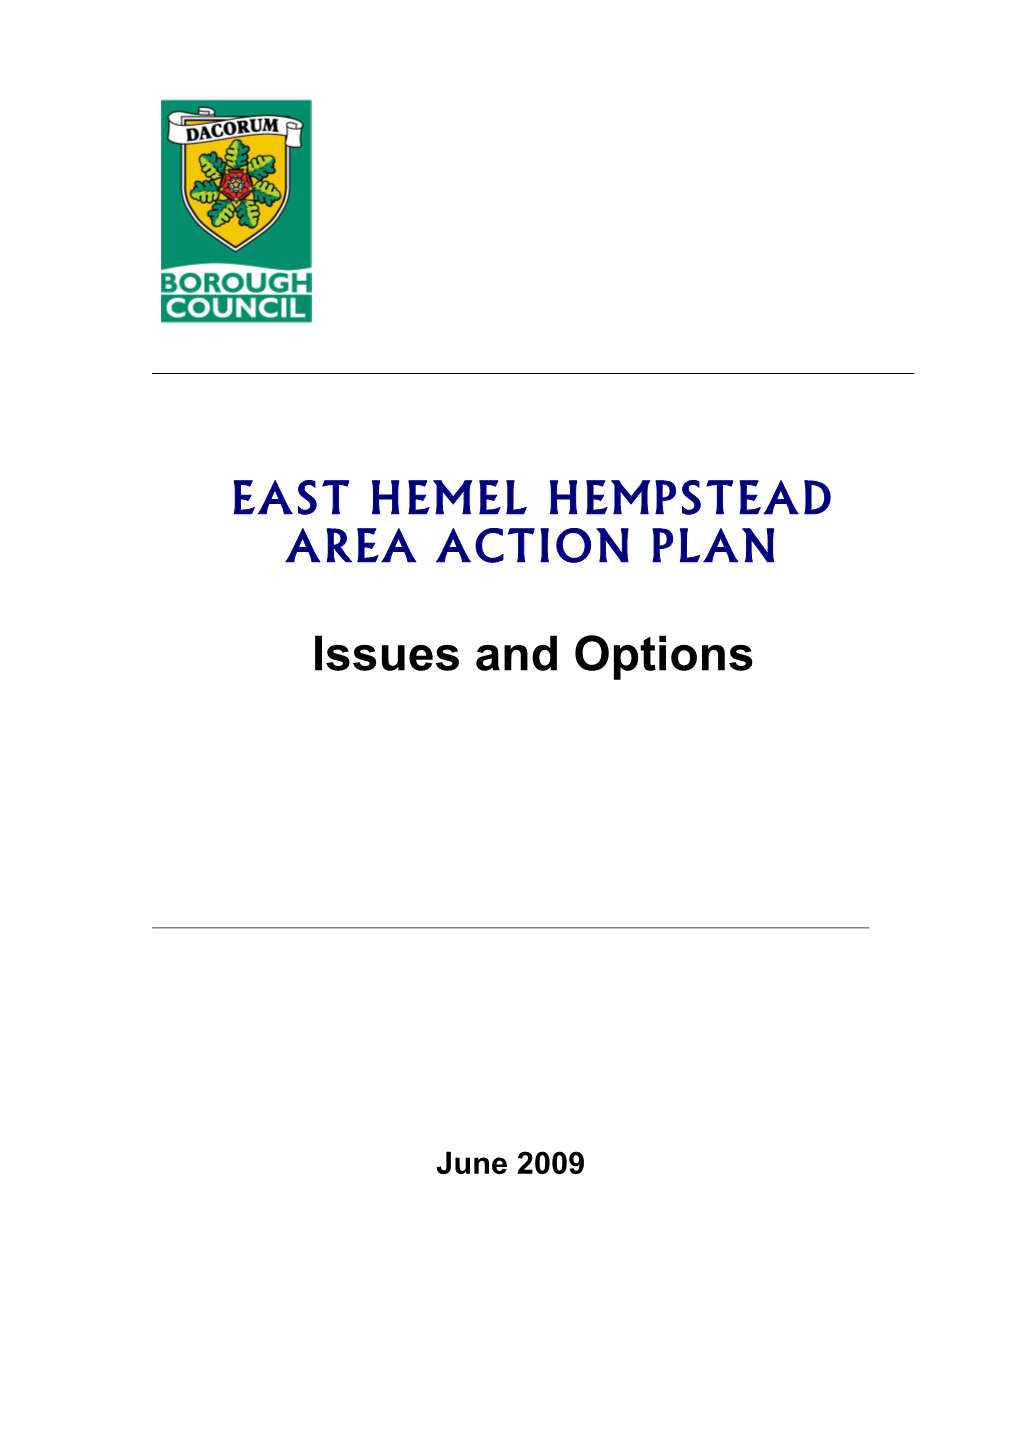 EAST HEMEL HEMPSTEAD AREA ACTION PLAN Issues and Options